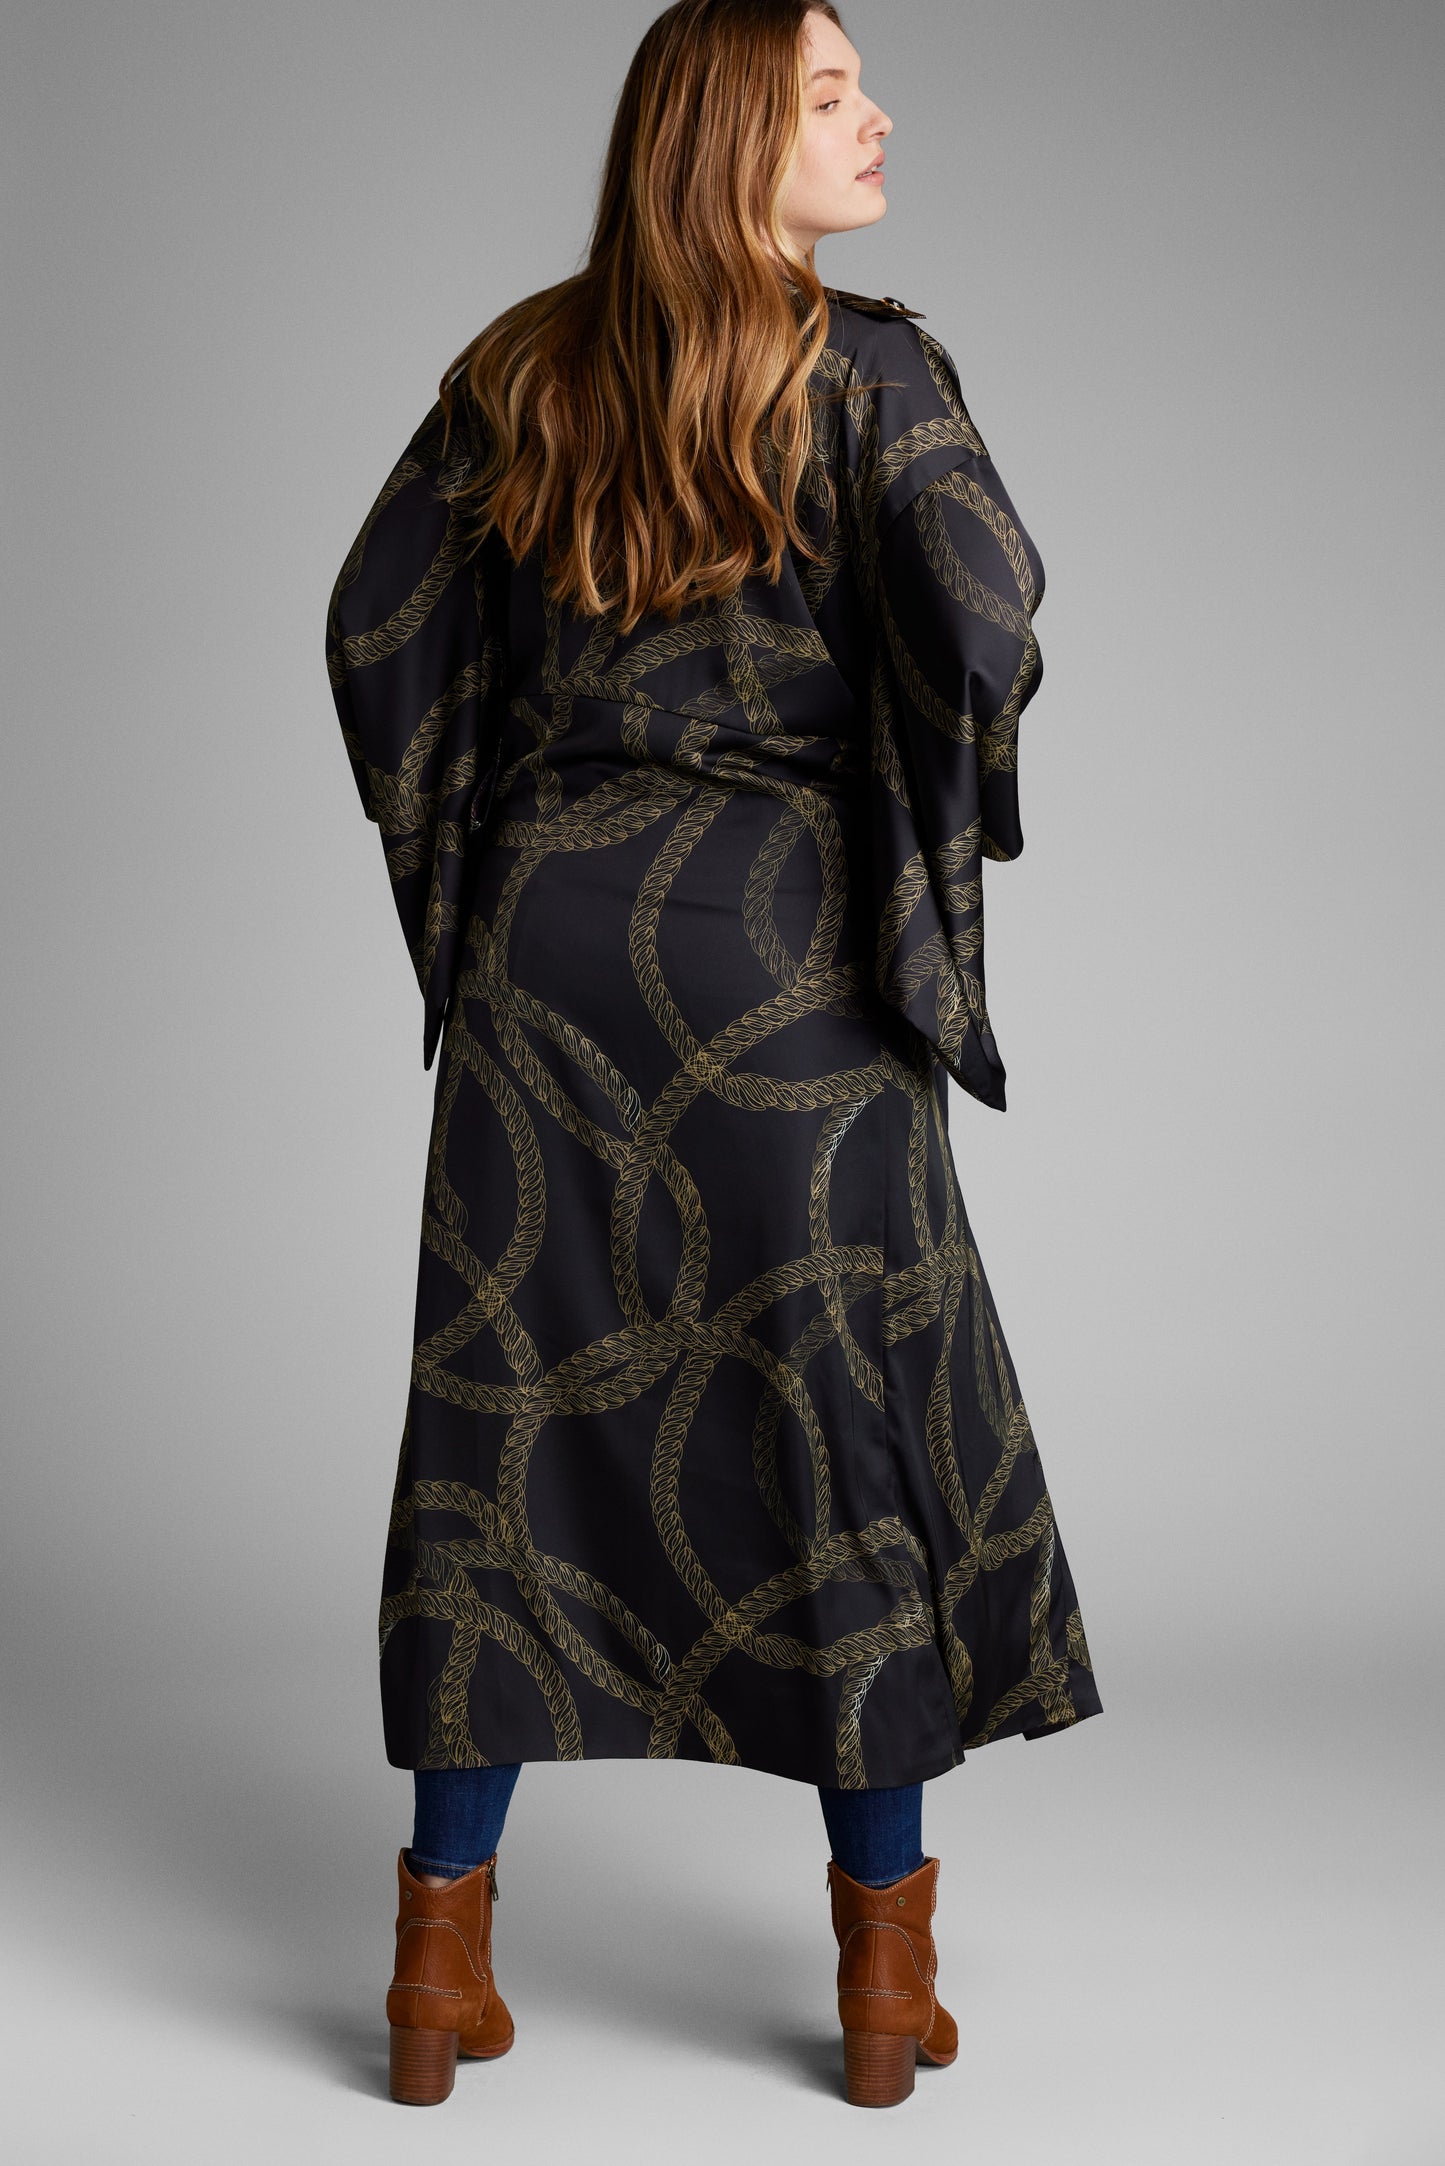 Side profile of woman wearing a black and gold chain print kimono duster made from recycled materials